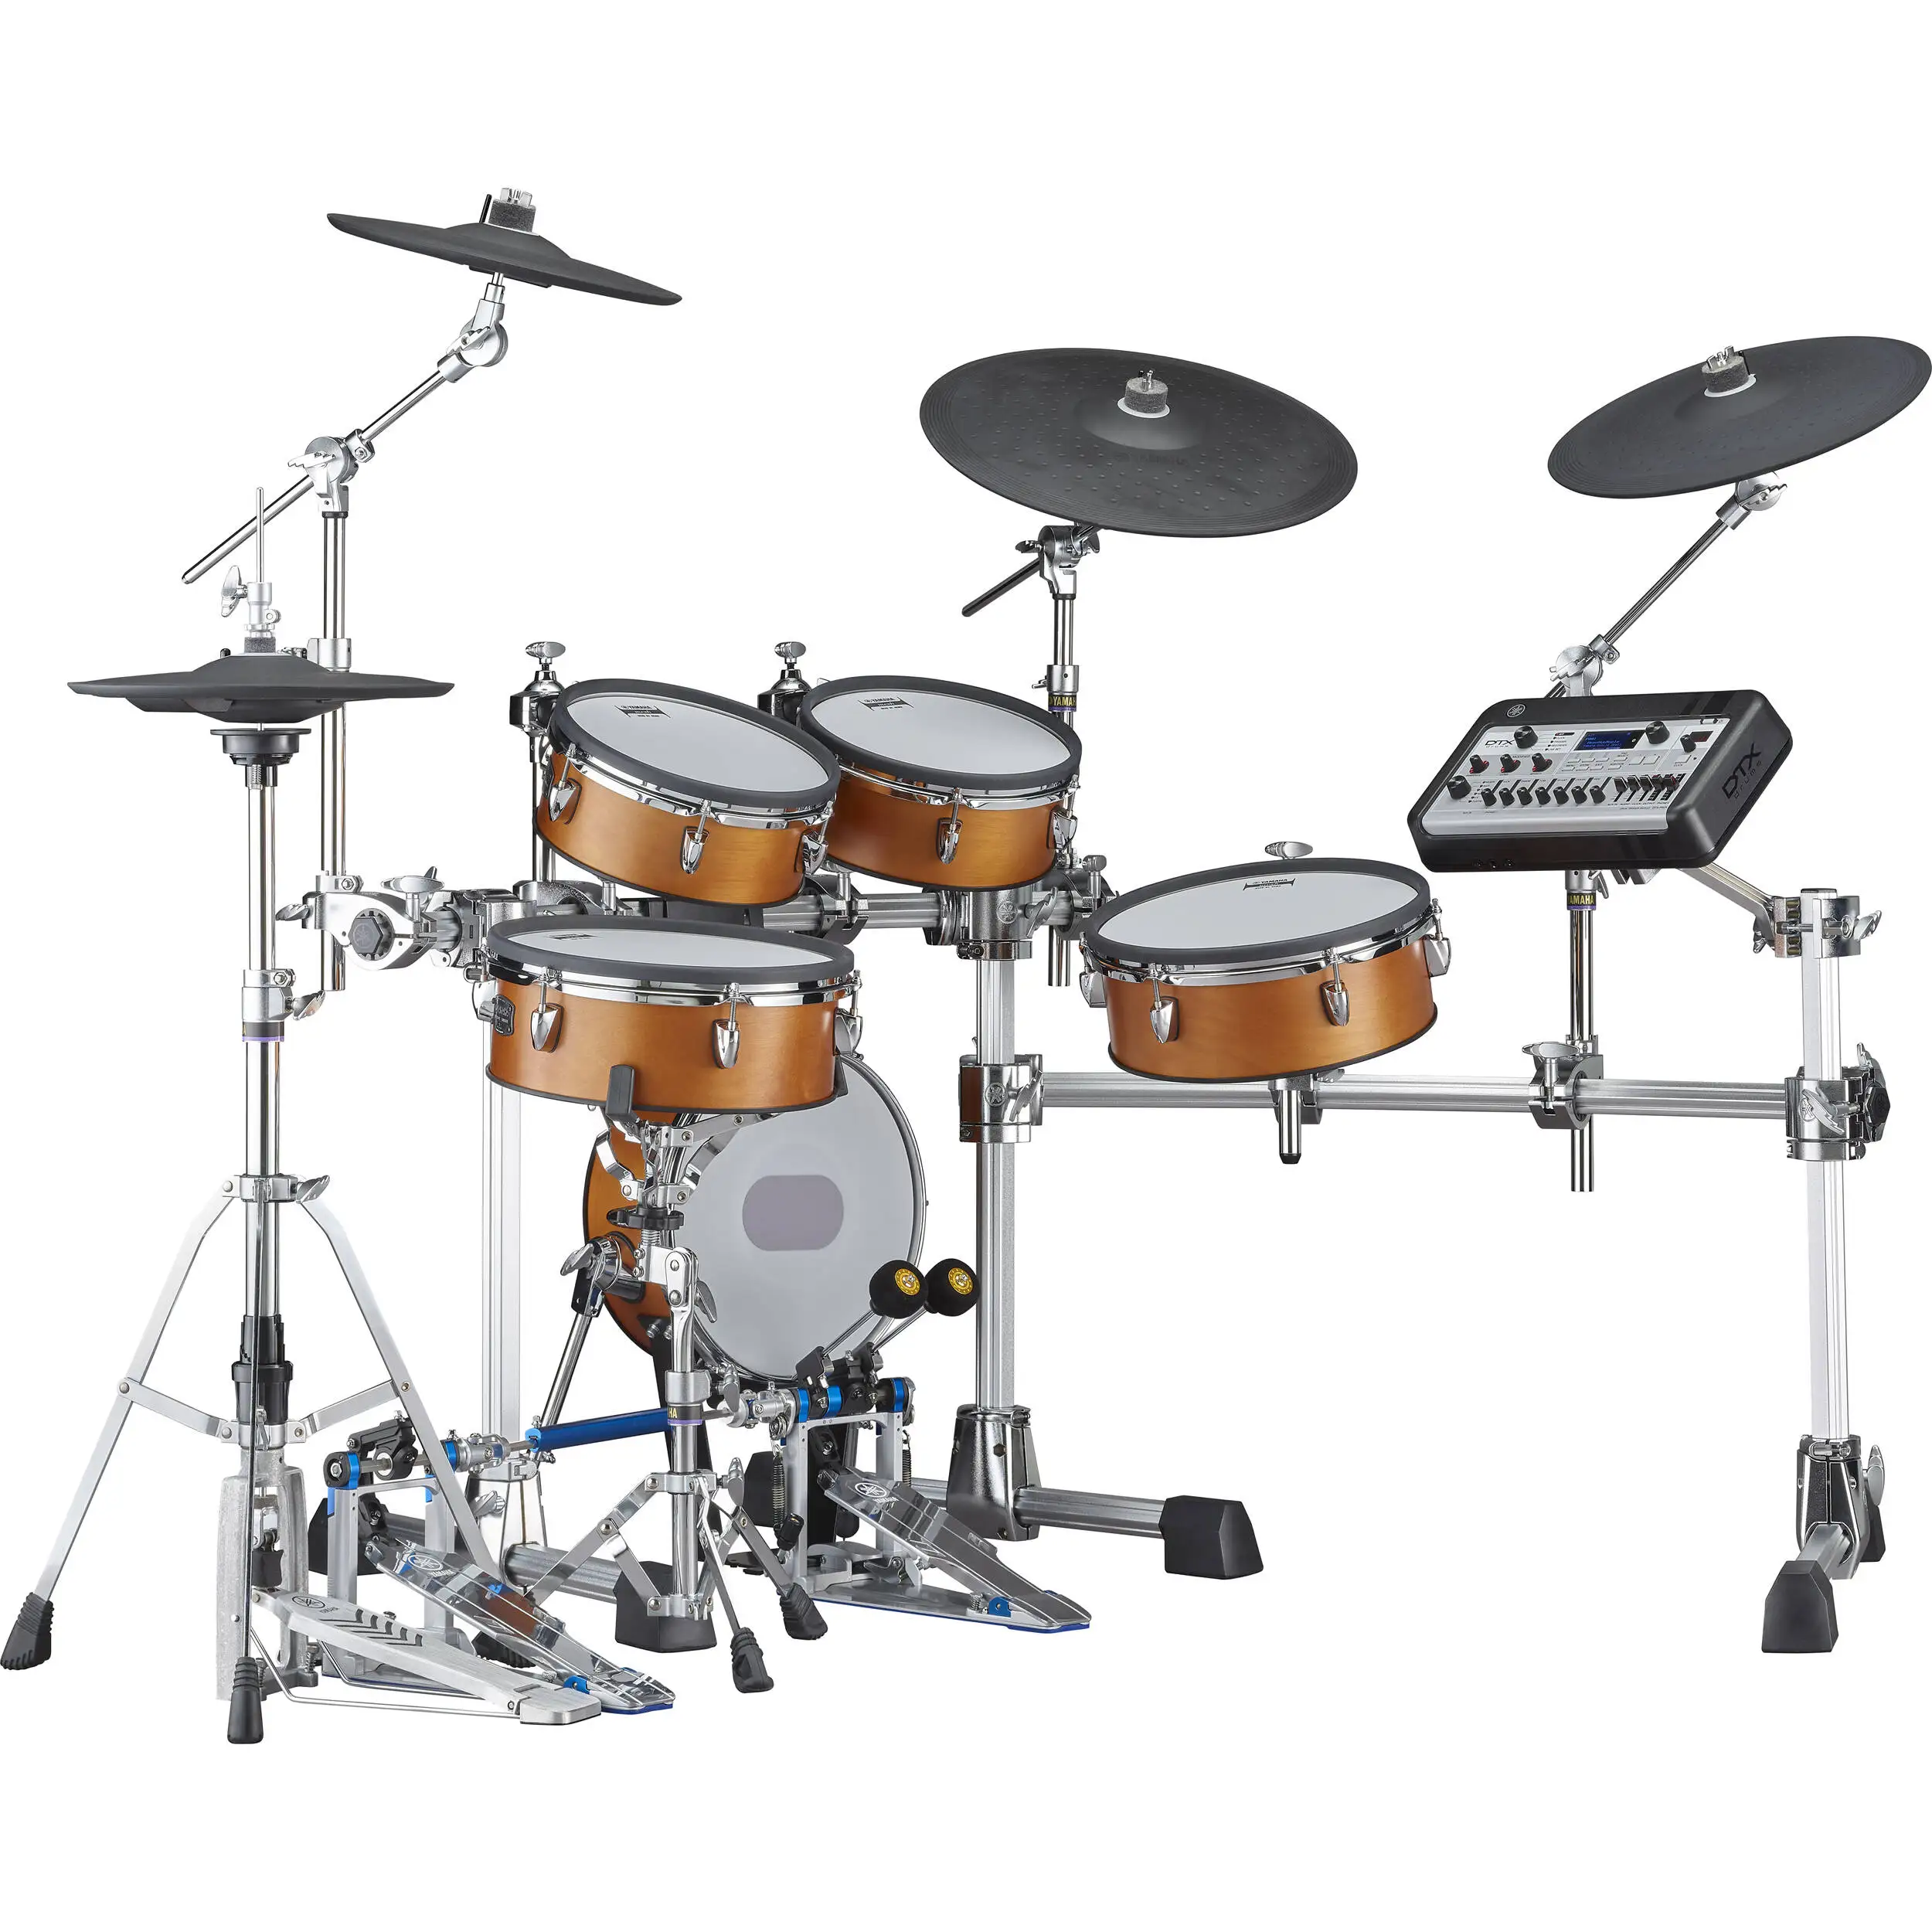 

100% Authentic DTX10K-M Electronic Drum Kit with Wood-Shell Mesh Pads and DTX-PROX Drum Module